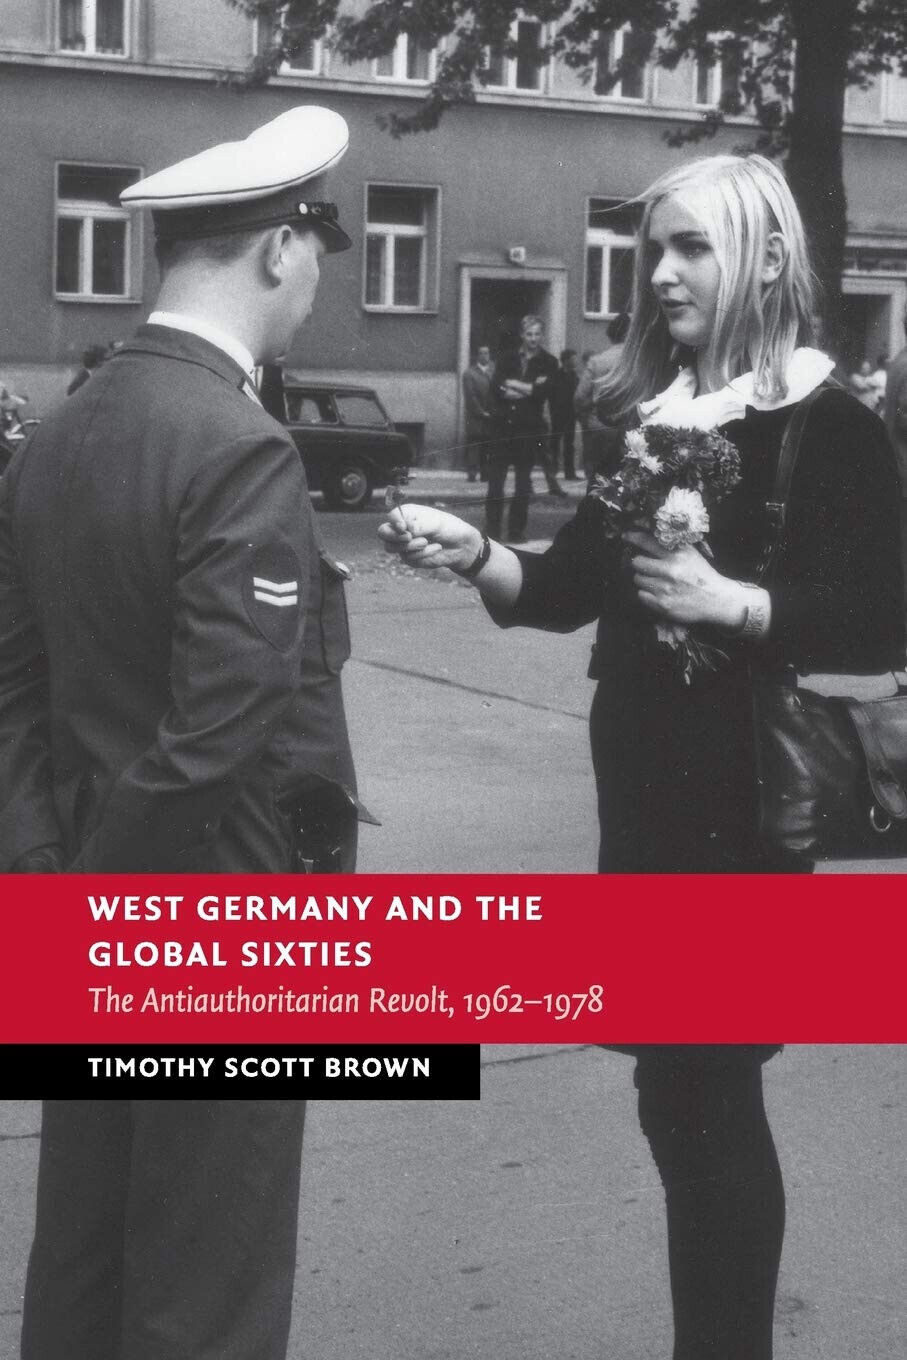 West Germany and the Global Sixties - Timothy Scott Brown - Cambridge, 2022 libro usato